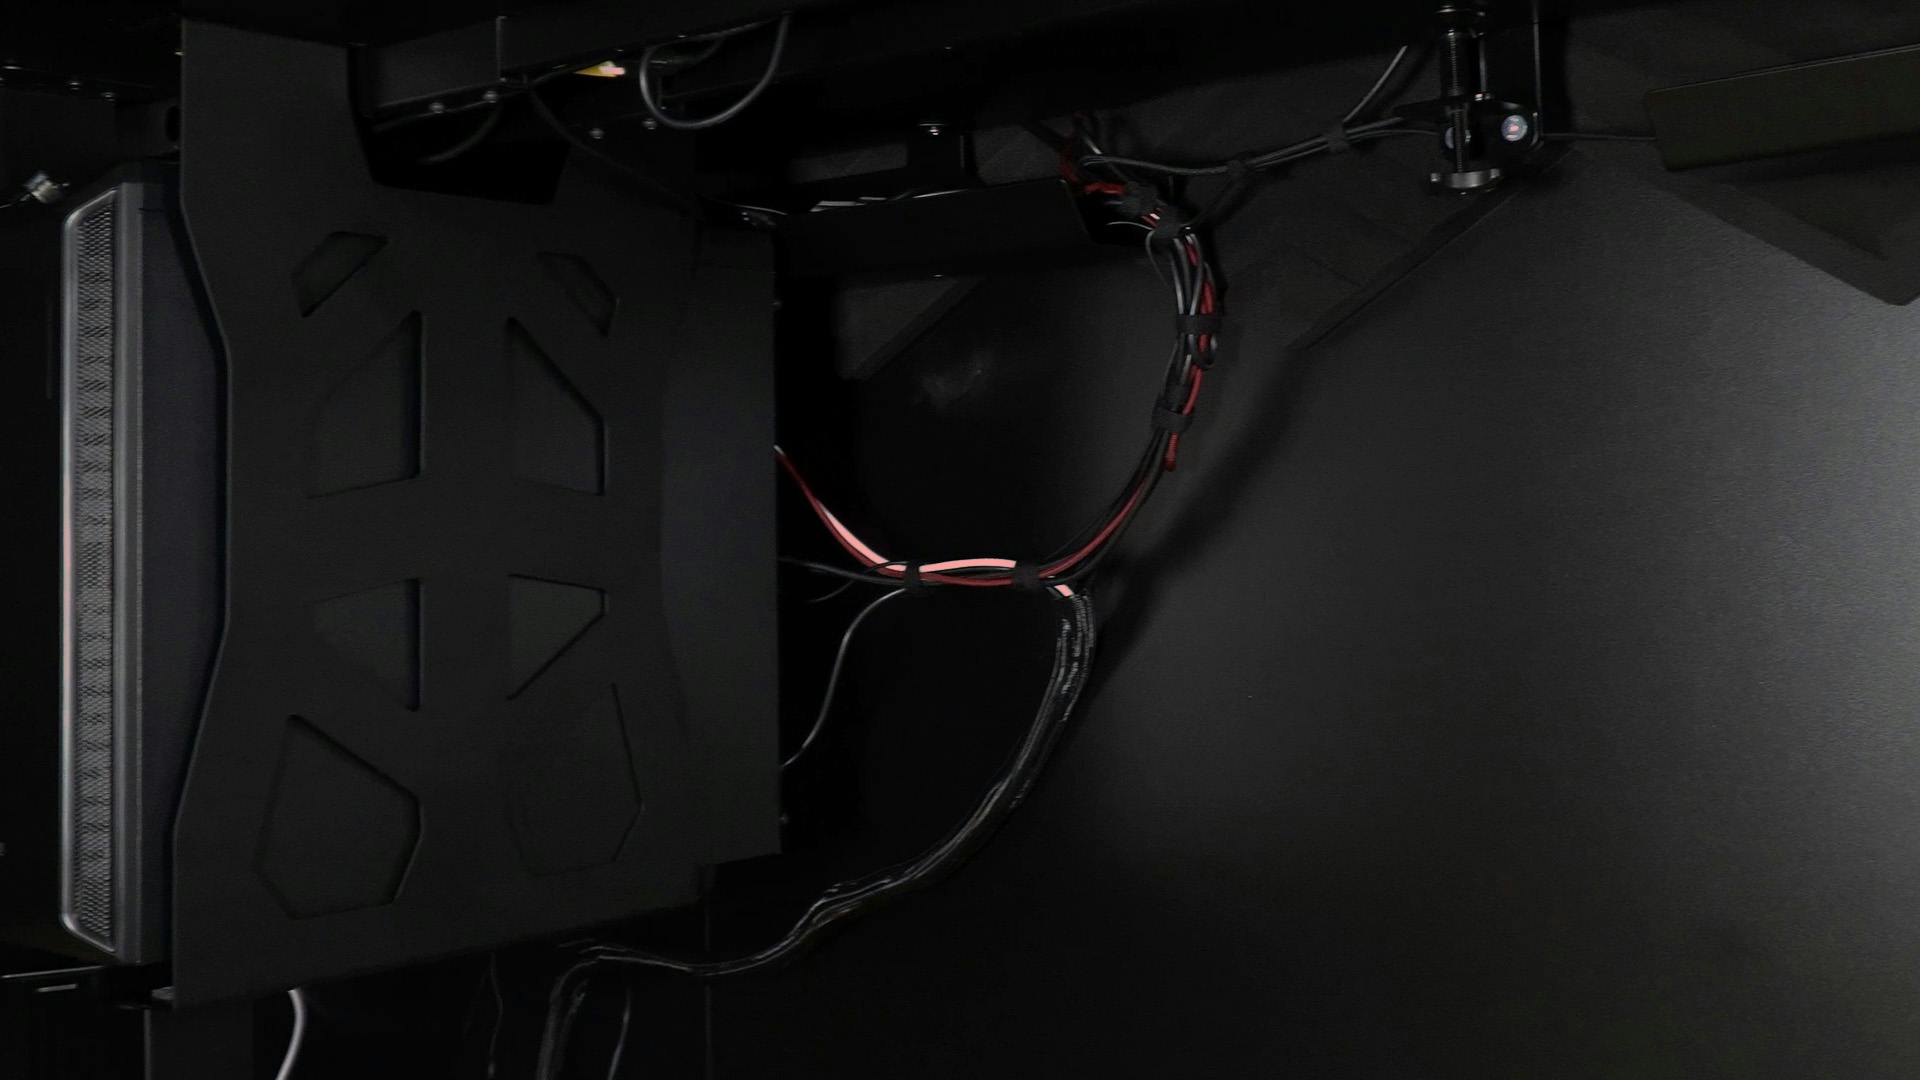 The ultimate guide to PC cable management